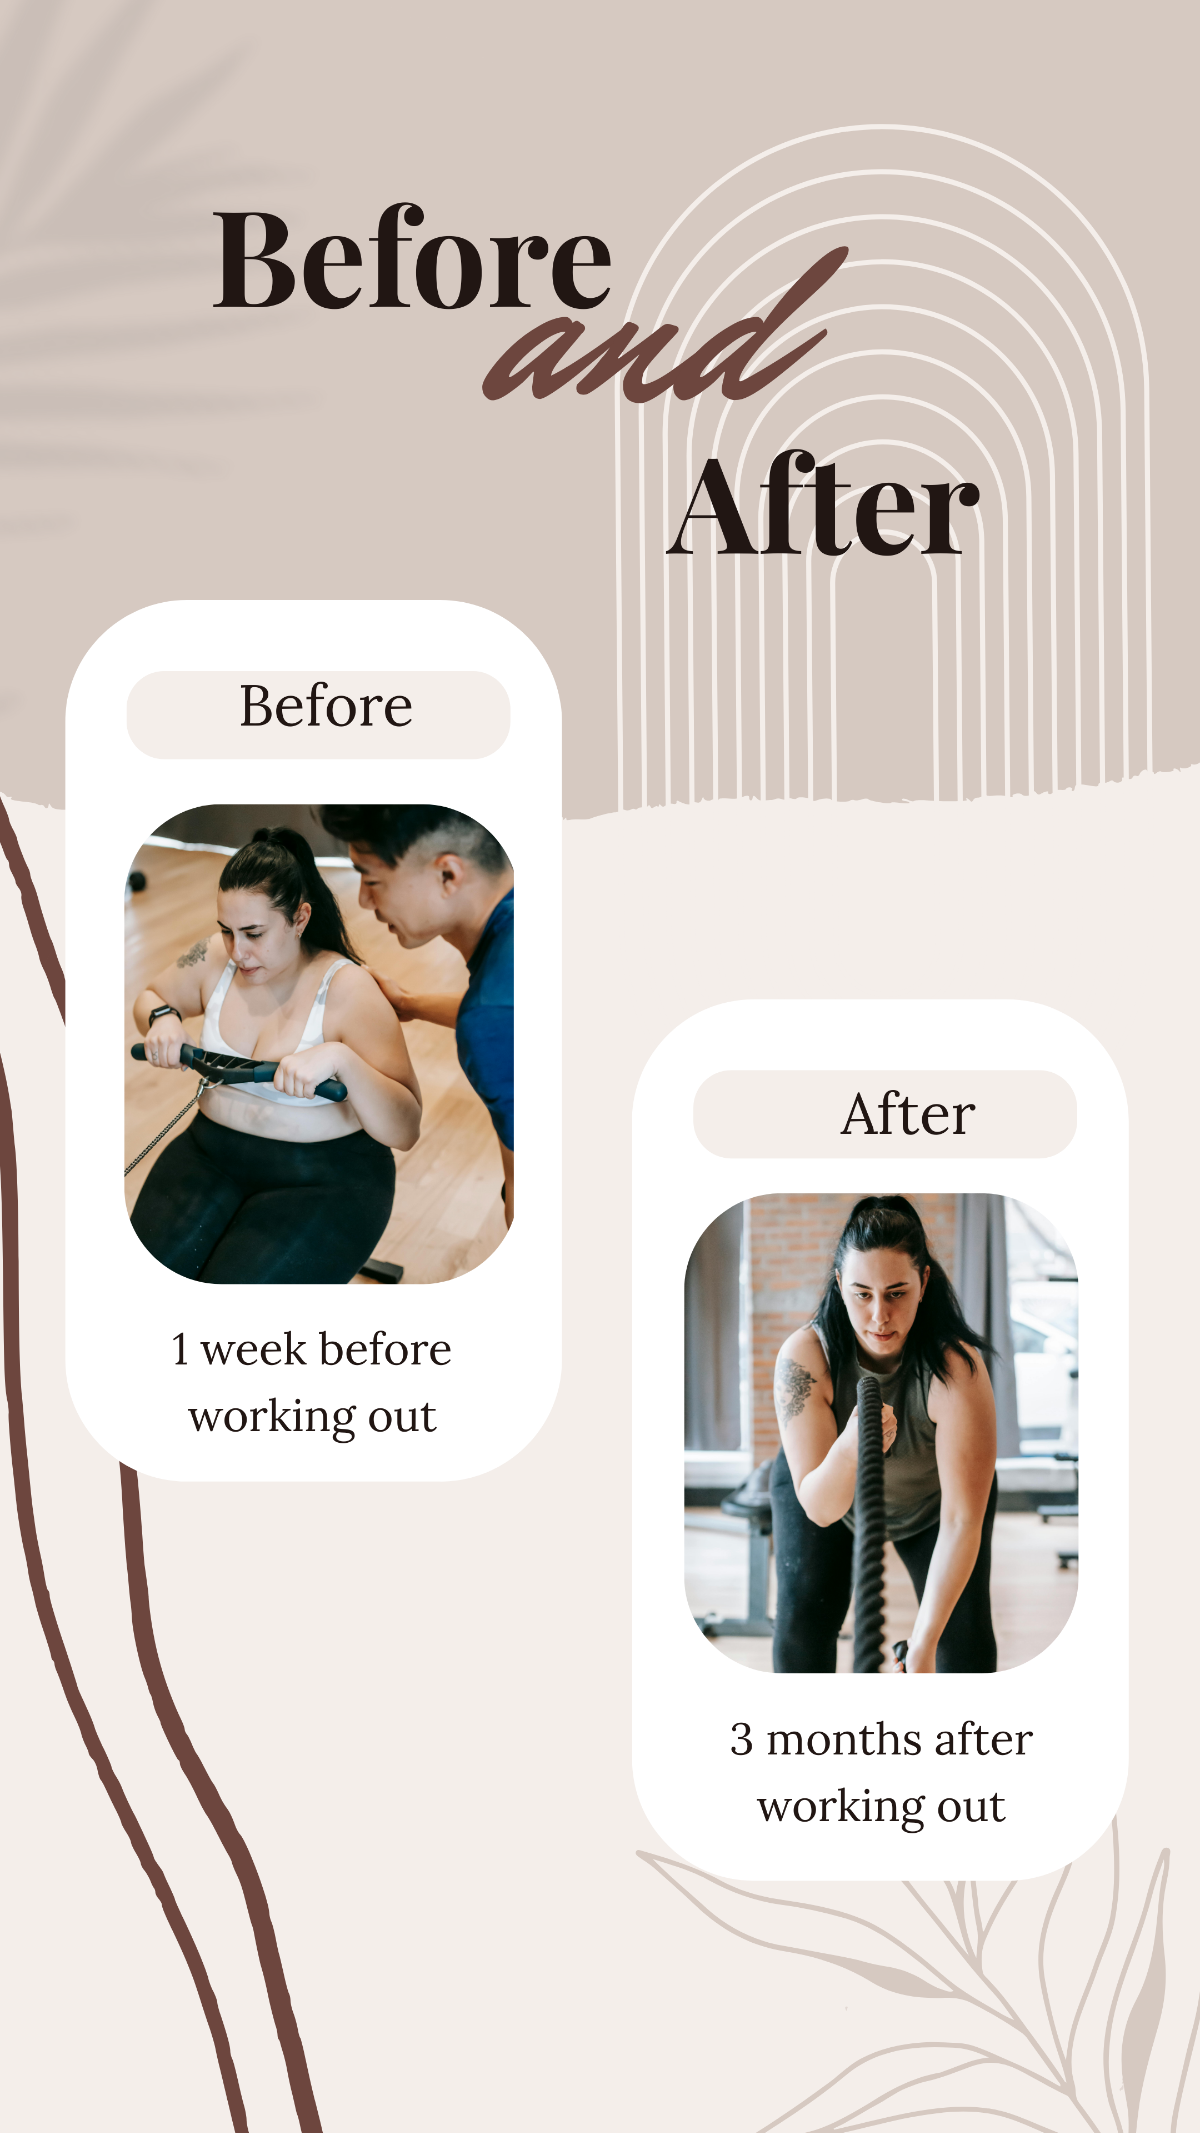 Before and After Instagram Post Template